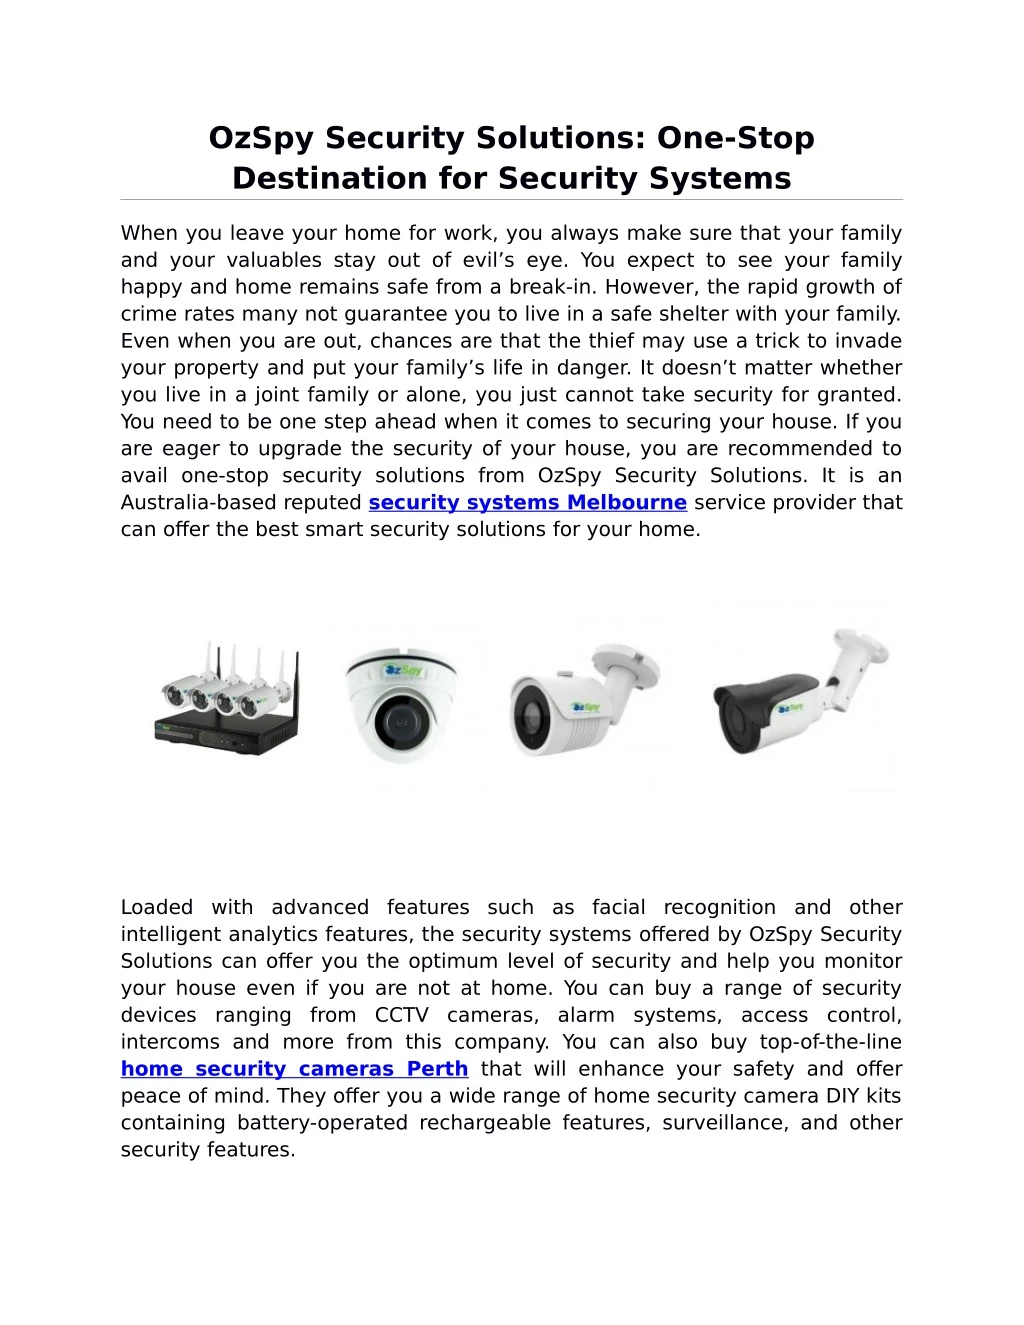 ozspy security solutions one stop destination